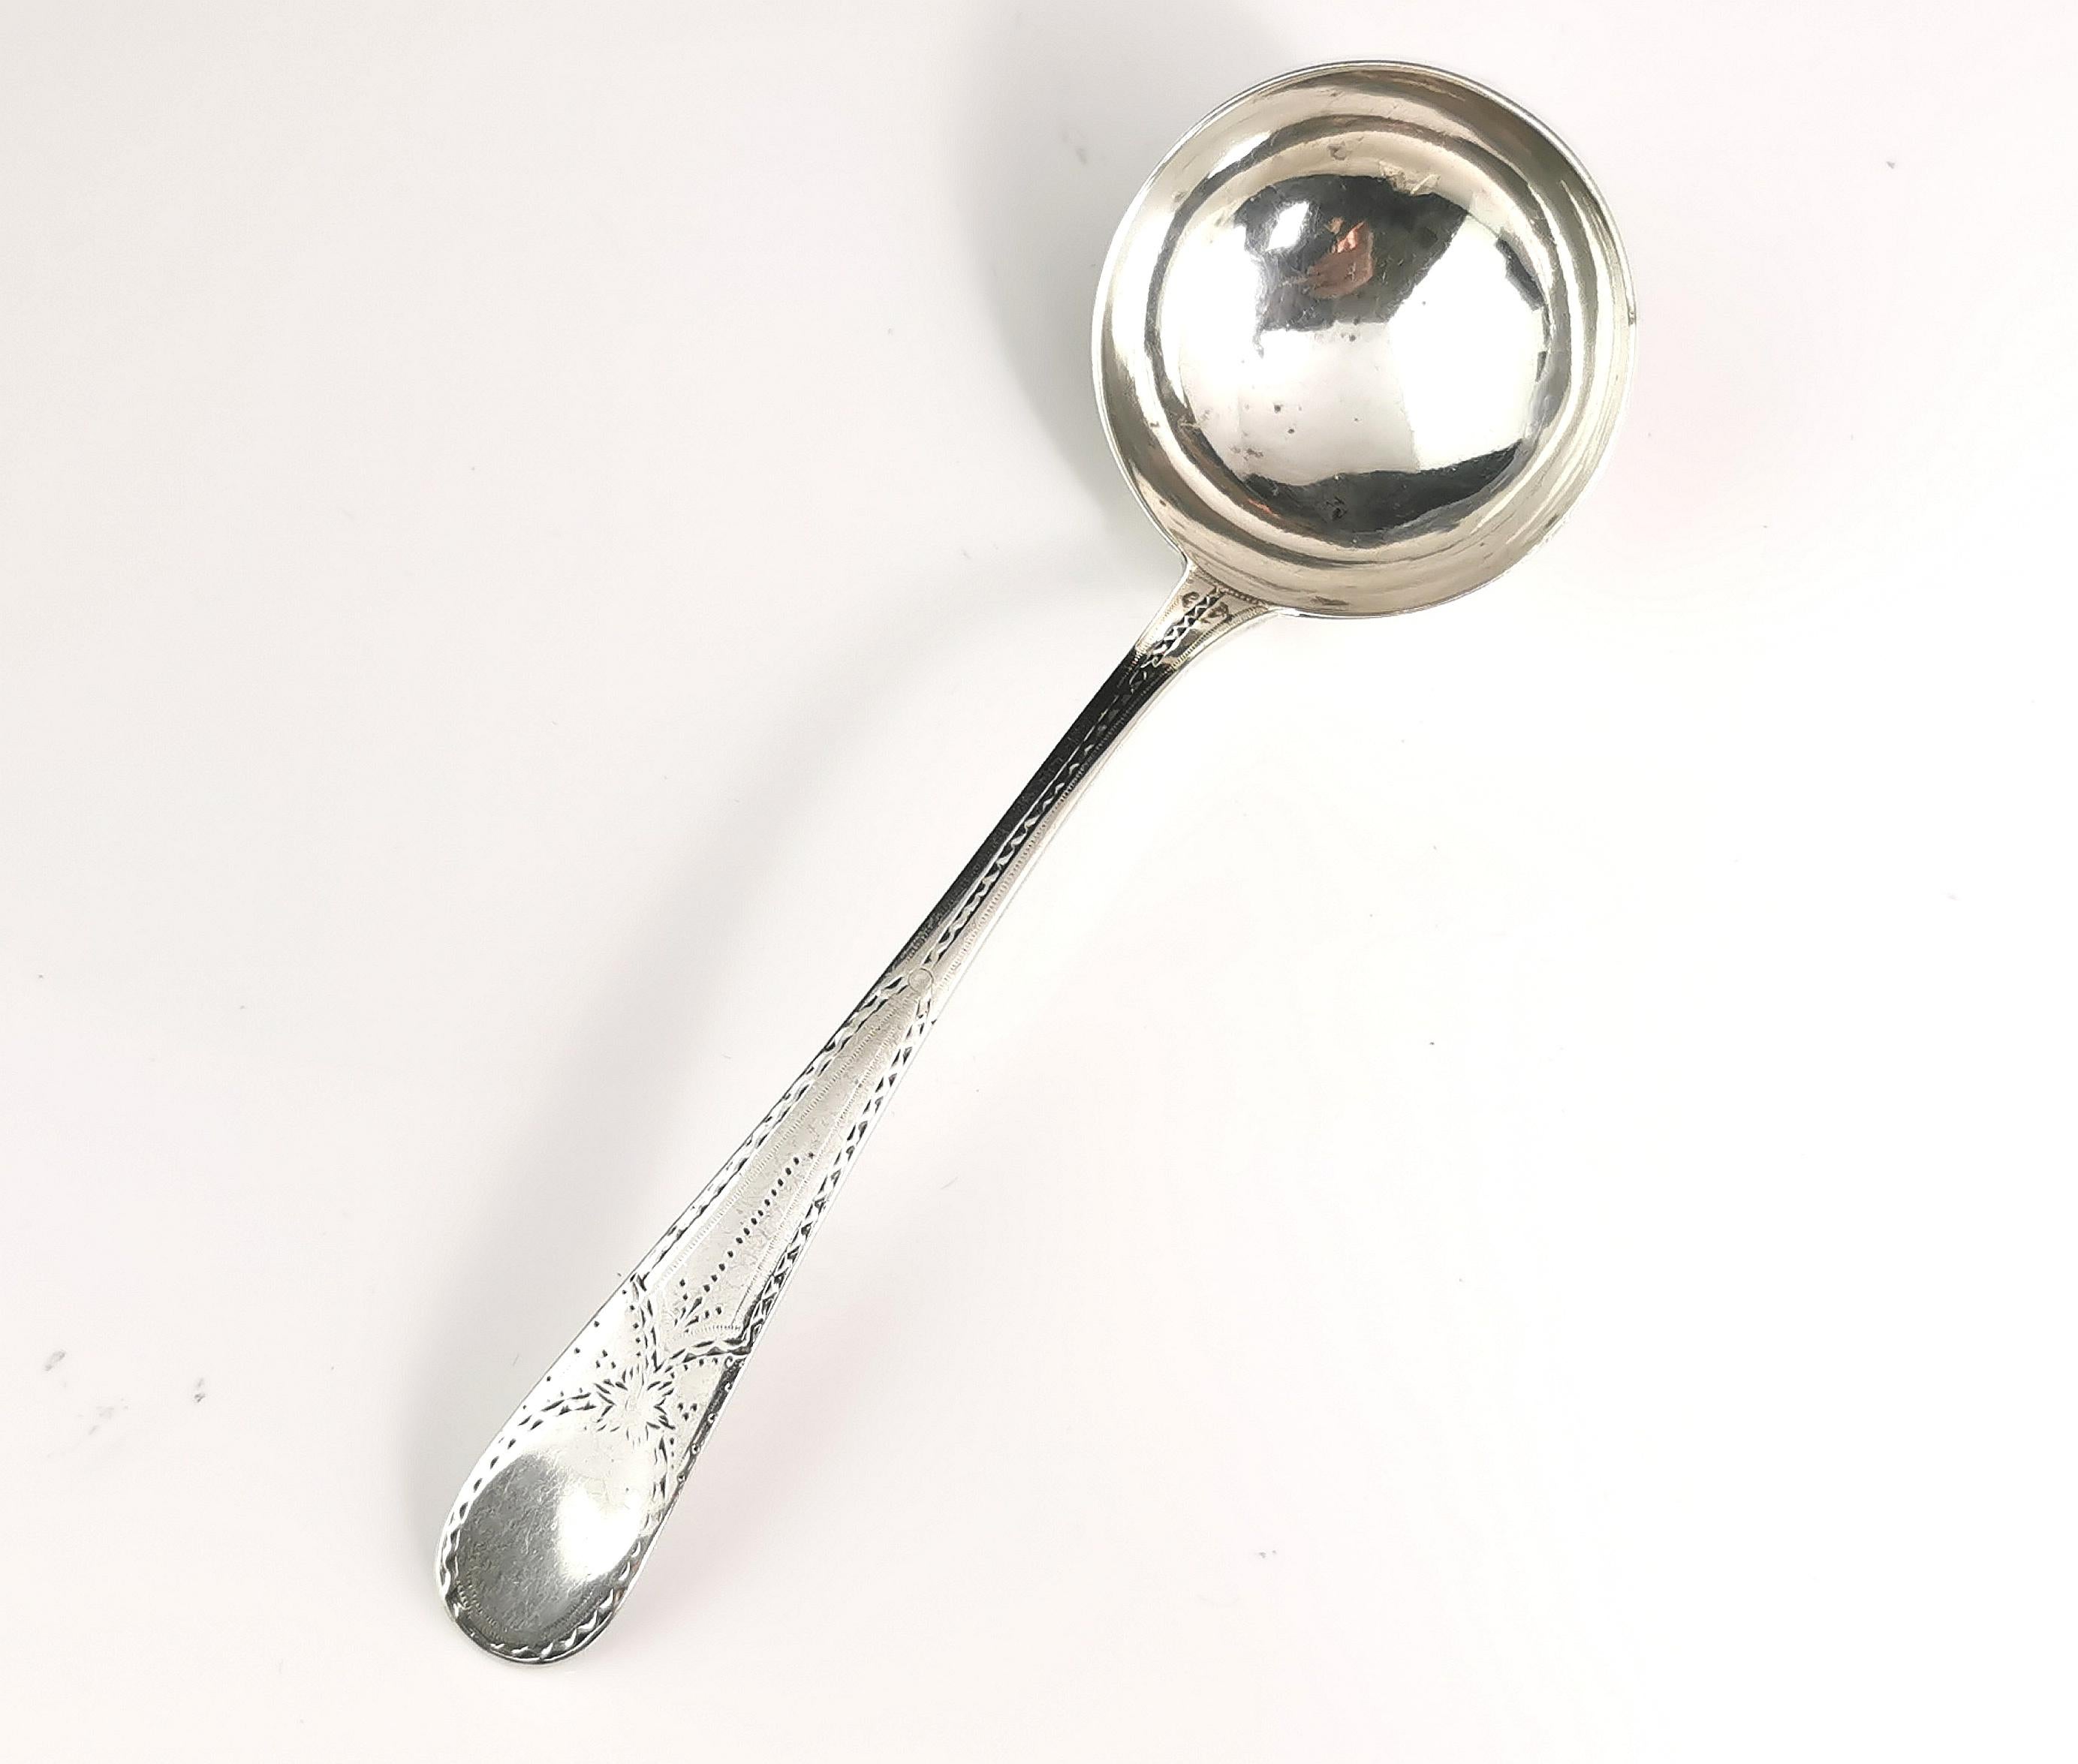 An attractive Georgian sterling silver ladle.

It has a deep round bowl with a bright cut engraved handle.

Large clear hallmarks to the reverse with a rat tail end pattern.

Nice and solid with a decent weight and strong handle, some minor